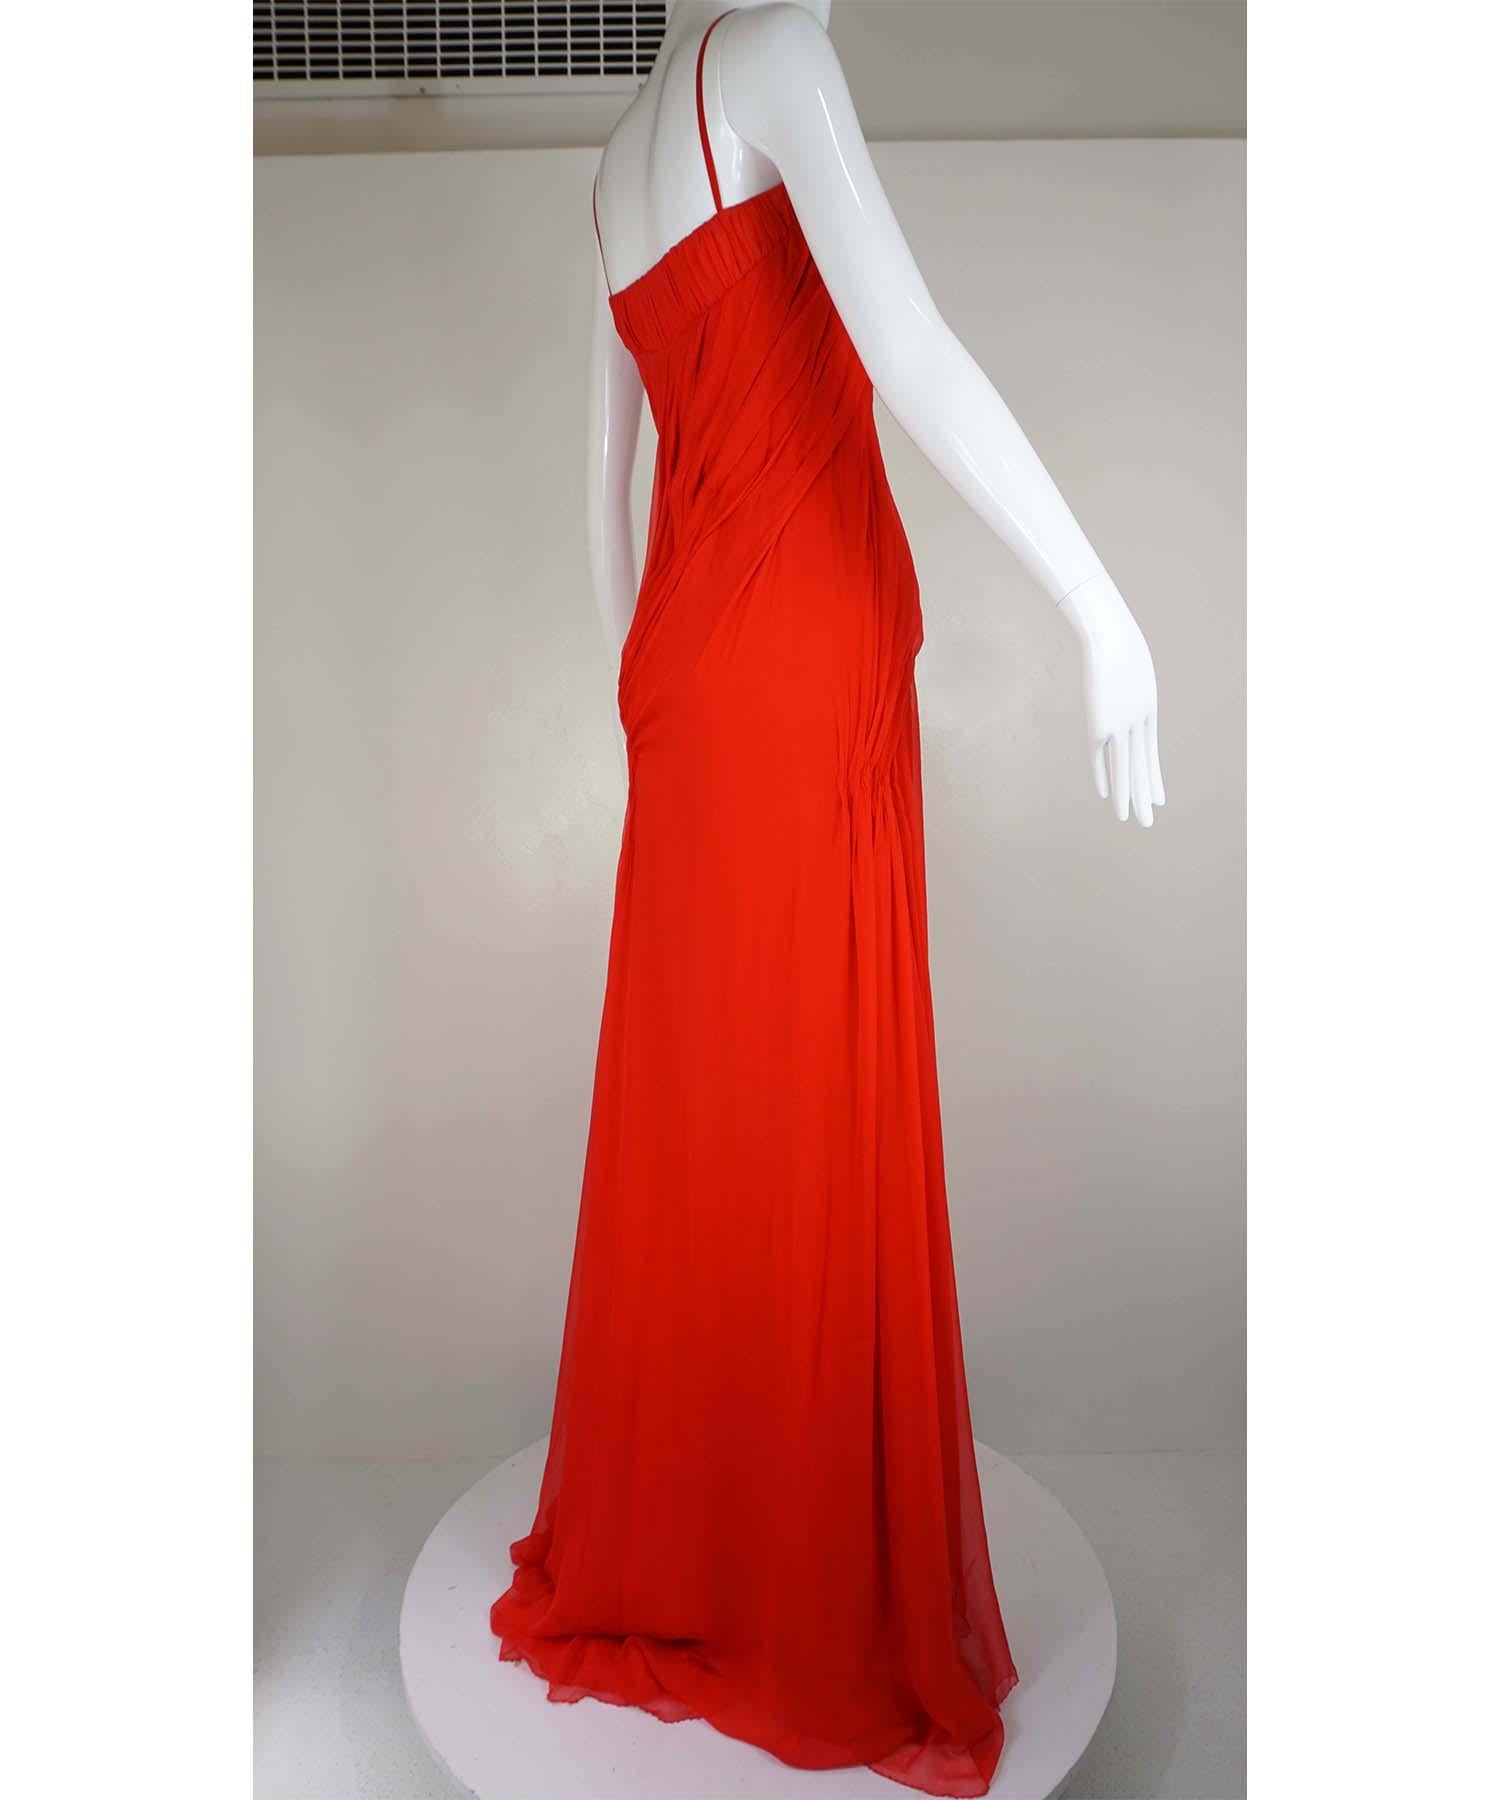 Atelier Versace Red Silk Chiffon Gown Patron Original In Good Condition For Sale In Carmel, CA